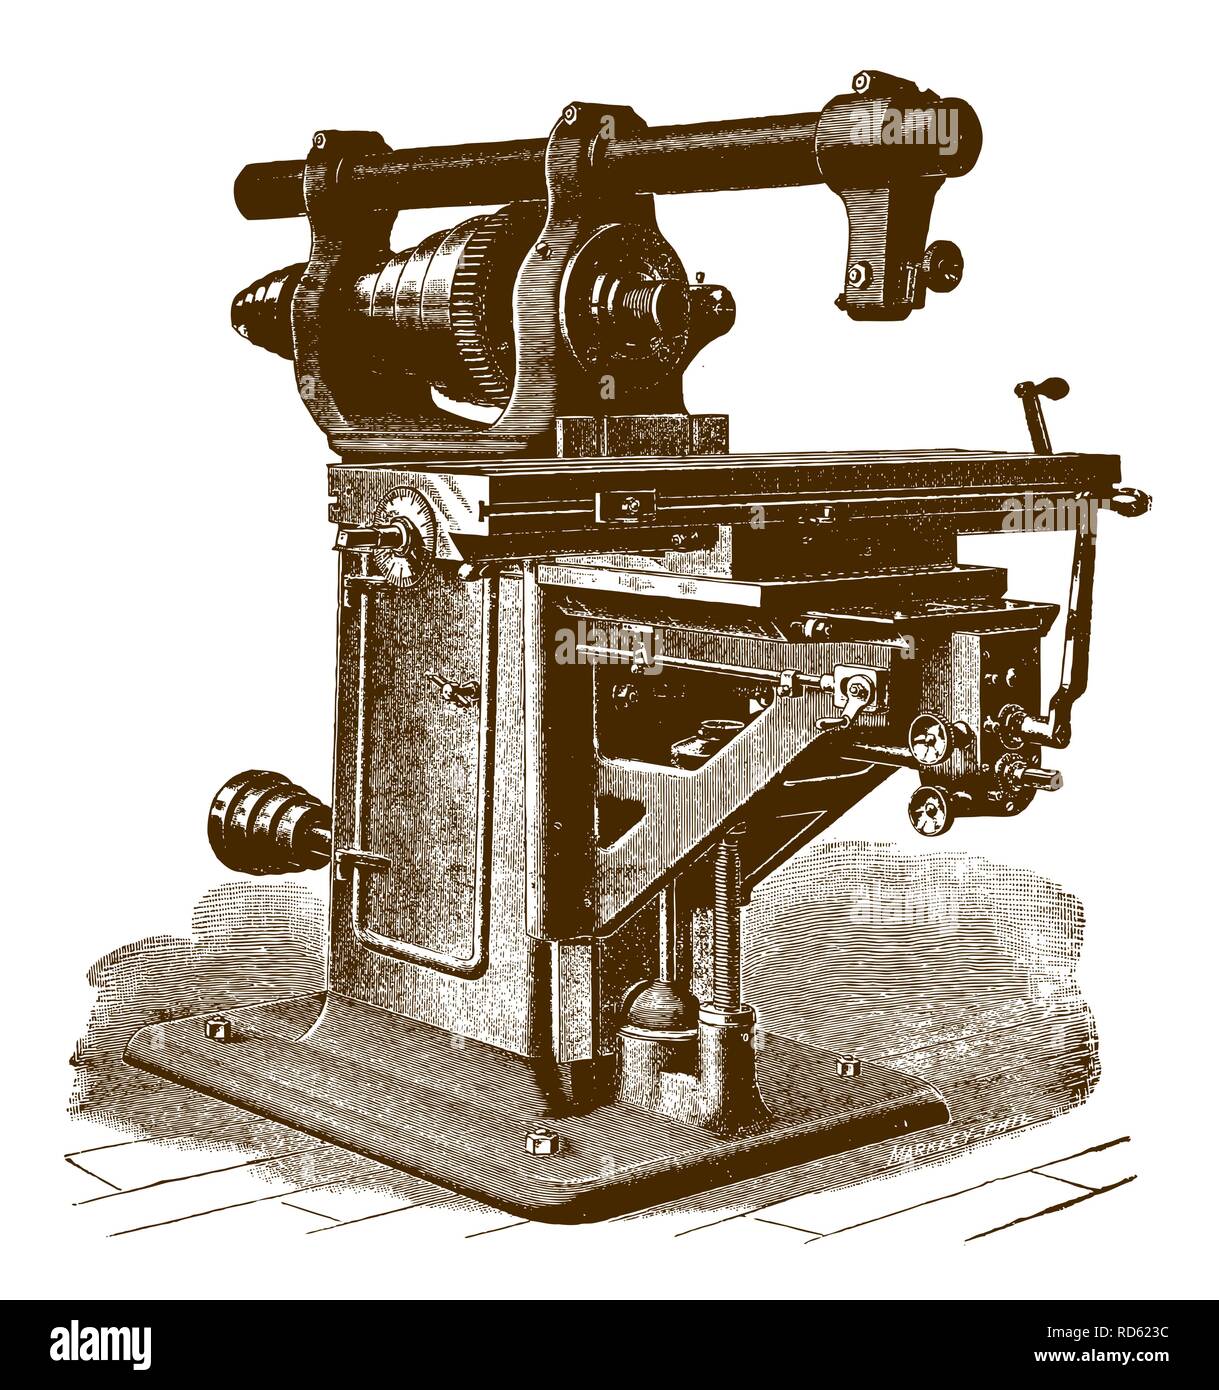 Historic milling machineÊ(after an etching or engraving from the 19th century) Stock Vector